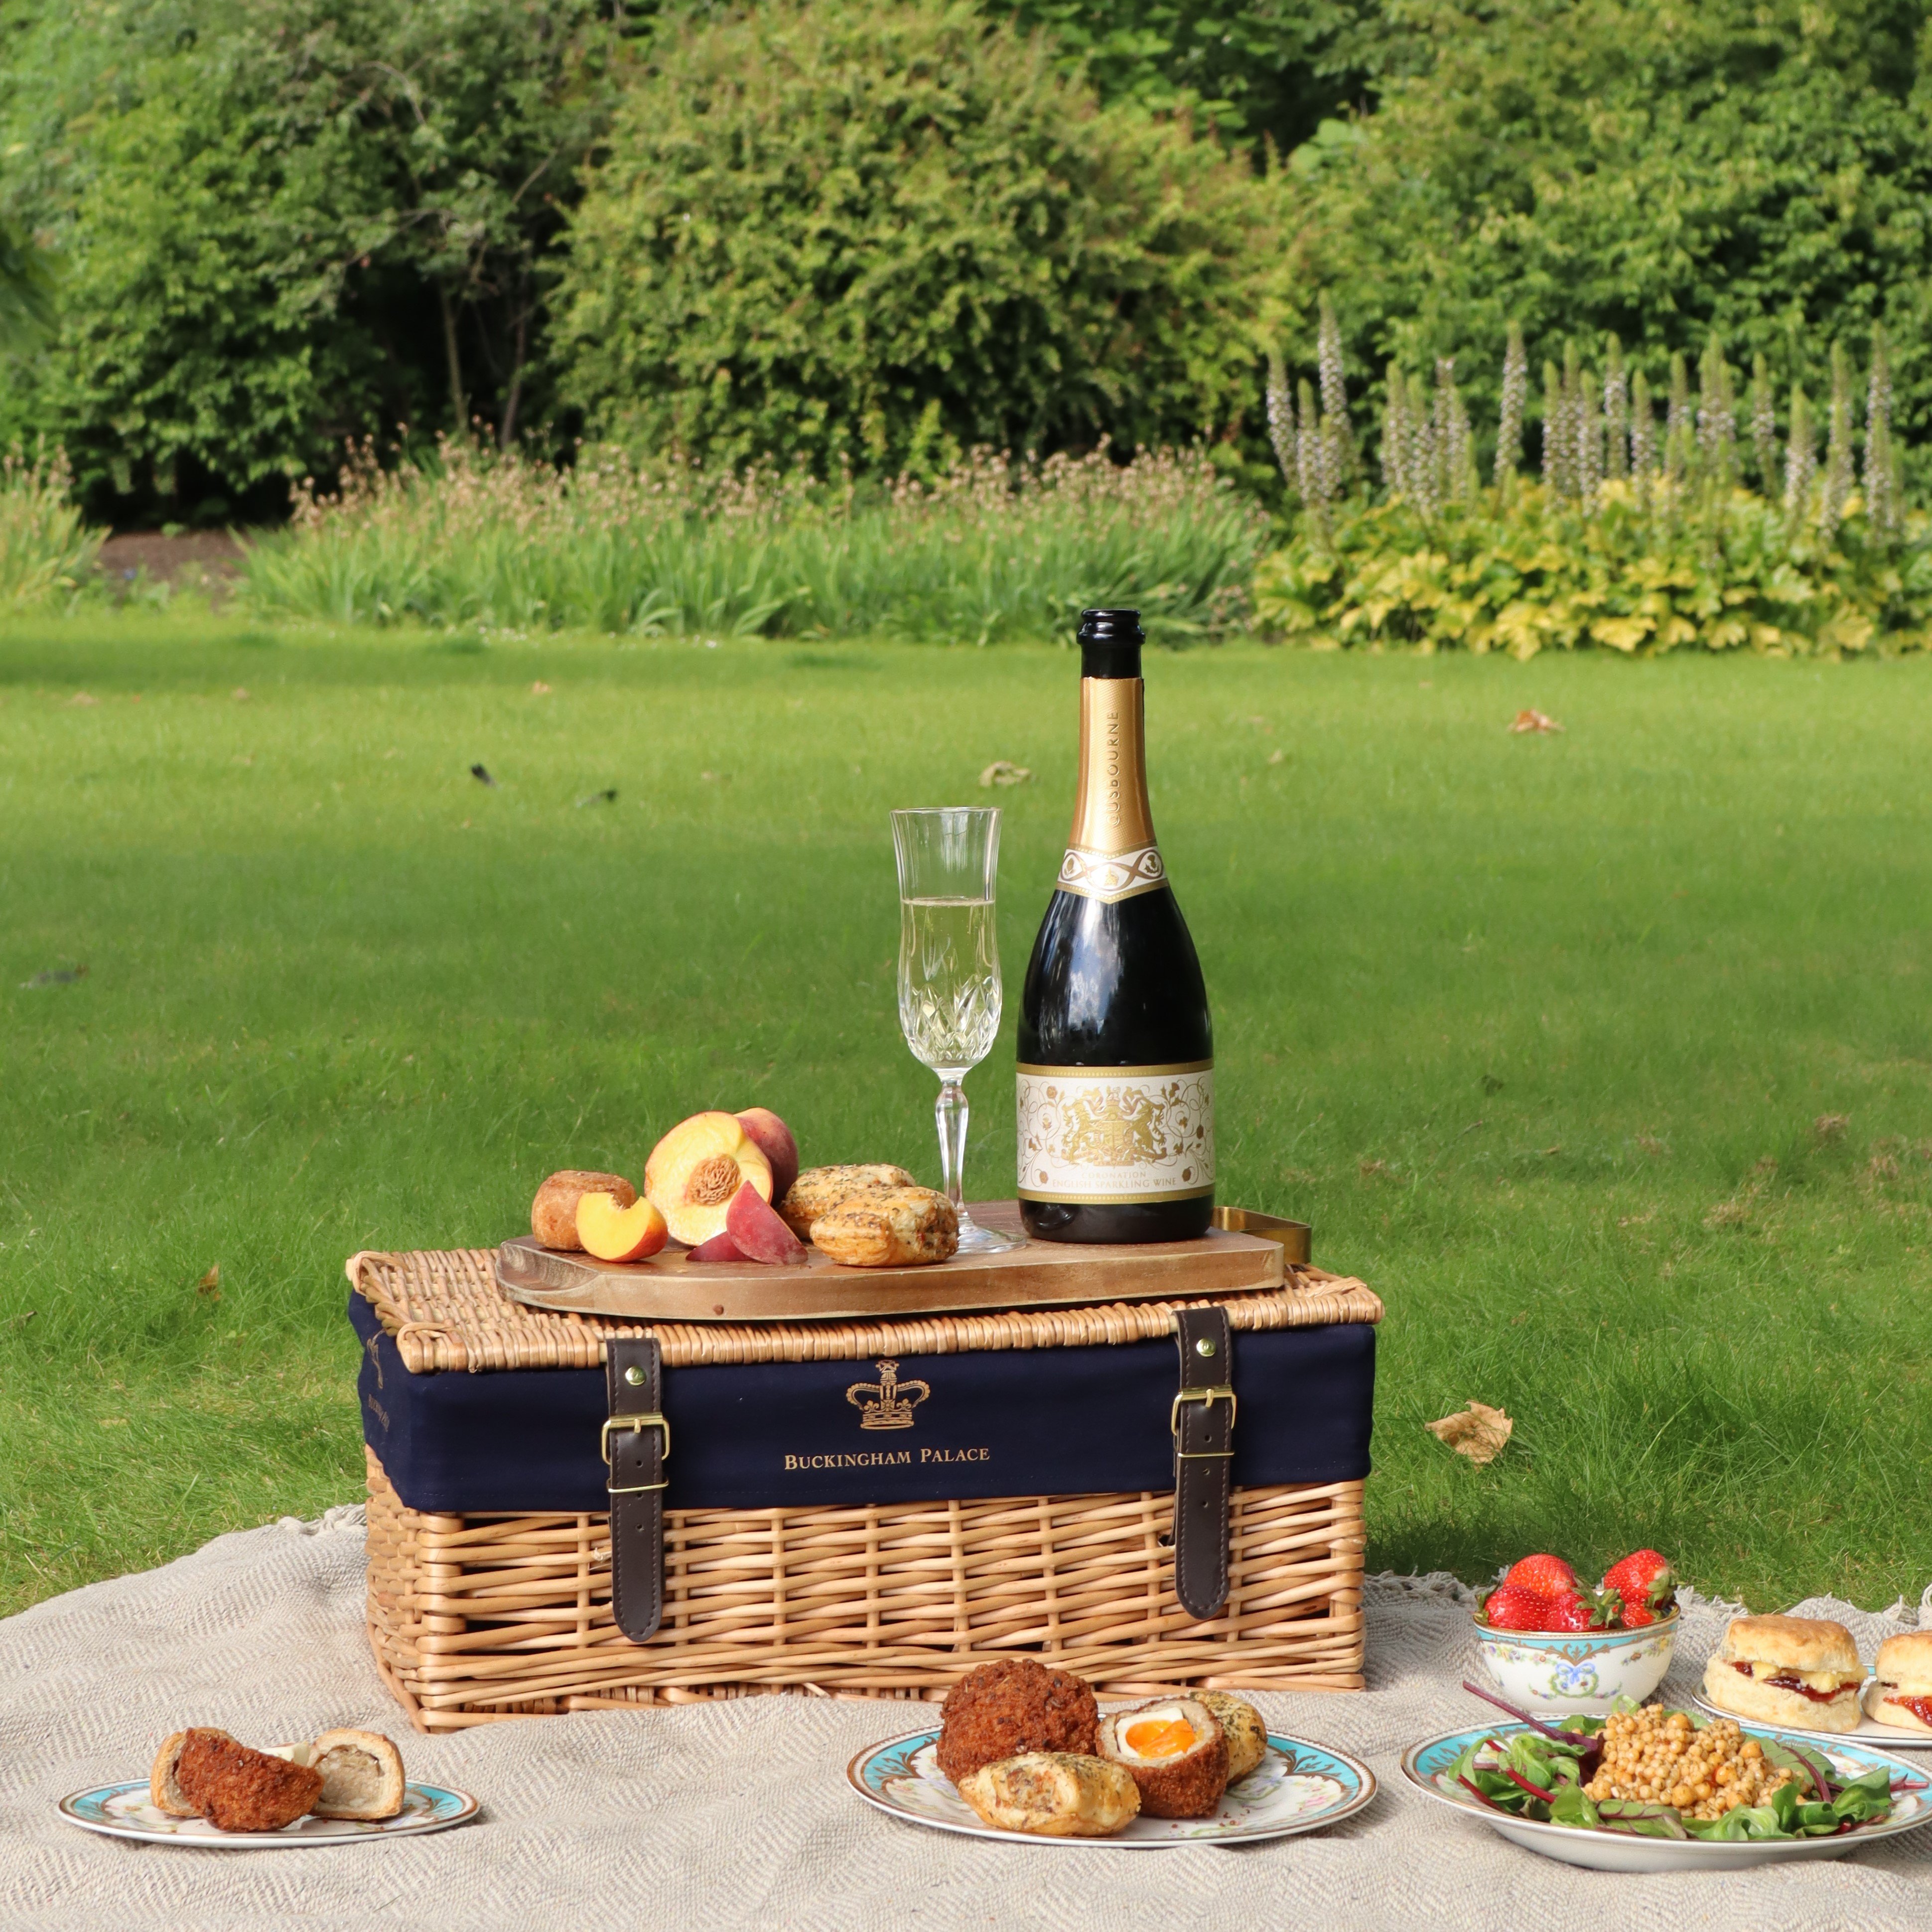 A picnic hamper with a variety of small plates and fruit displayed around it